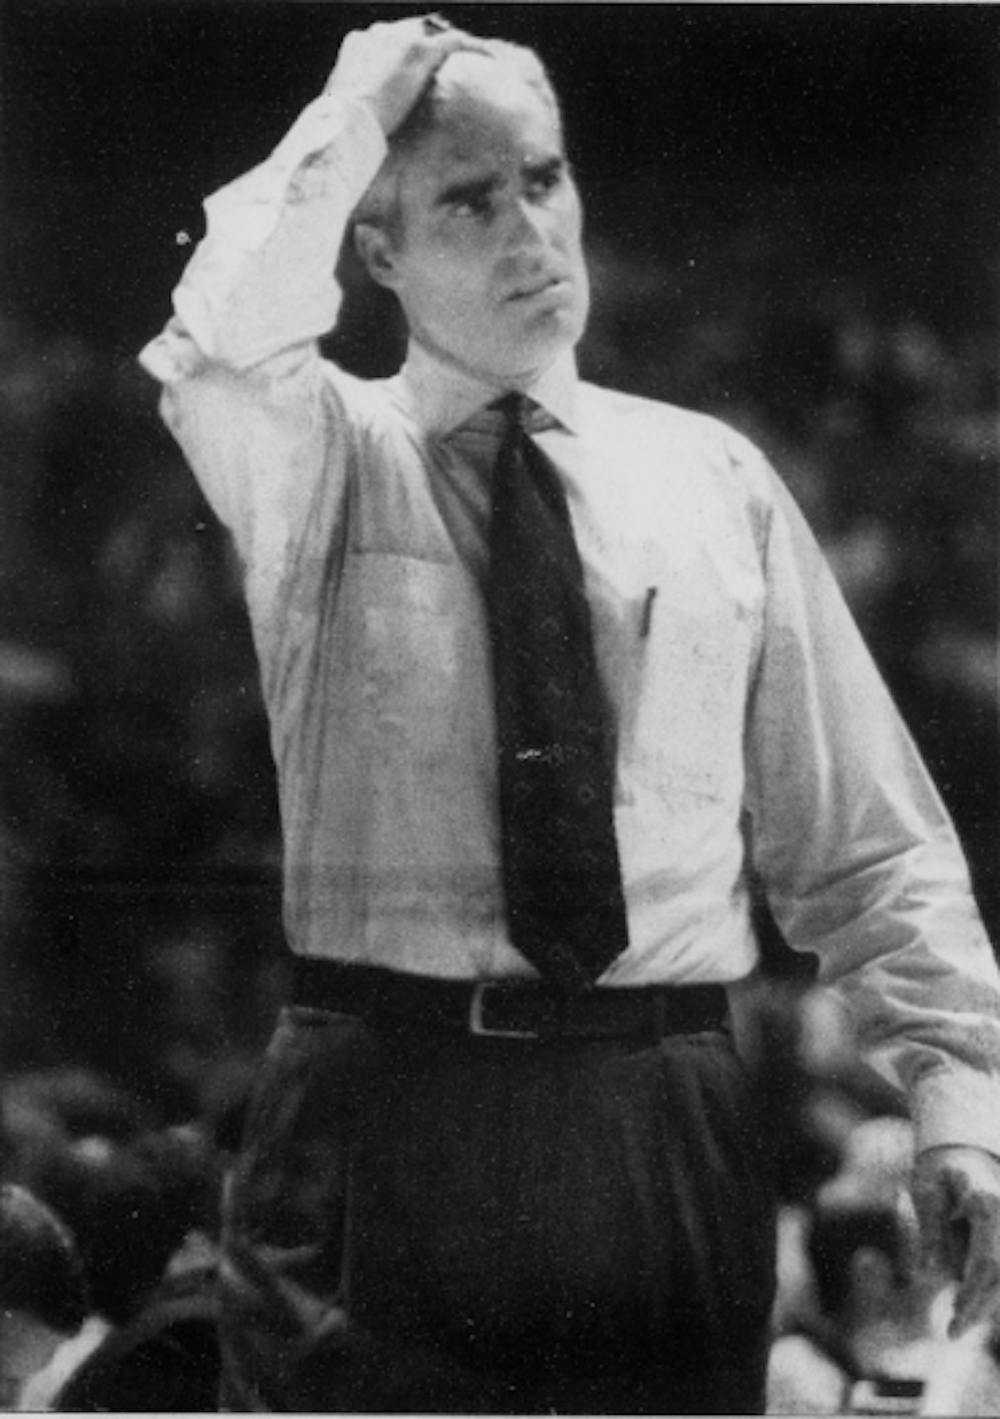 DTH Archive. In his second season with the Tar Heels, UNC coach Matt Doherty had to endure many tough moments. The Tar Heels finished 8-20, their worst record in school history. 